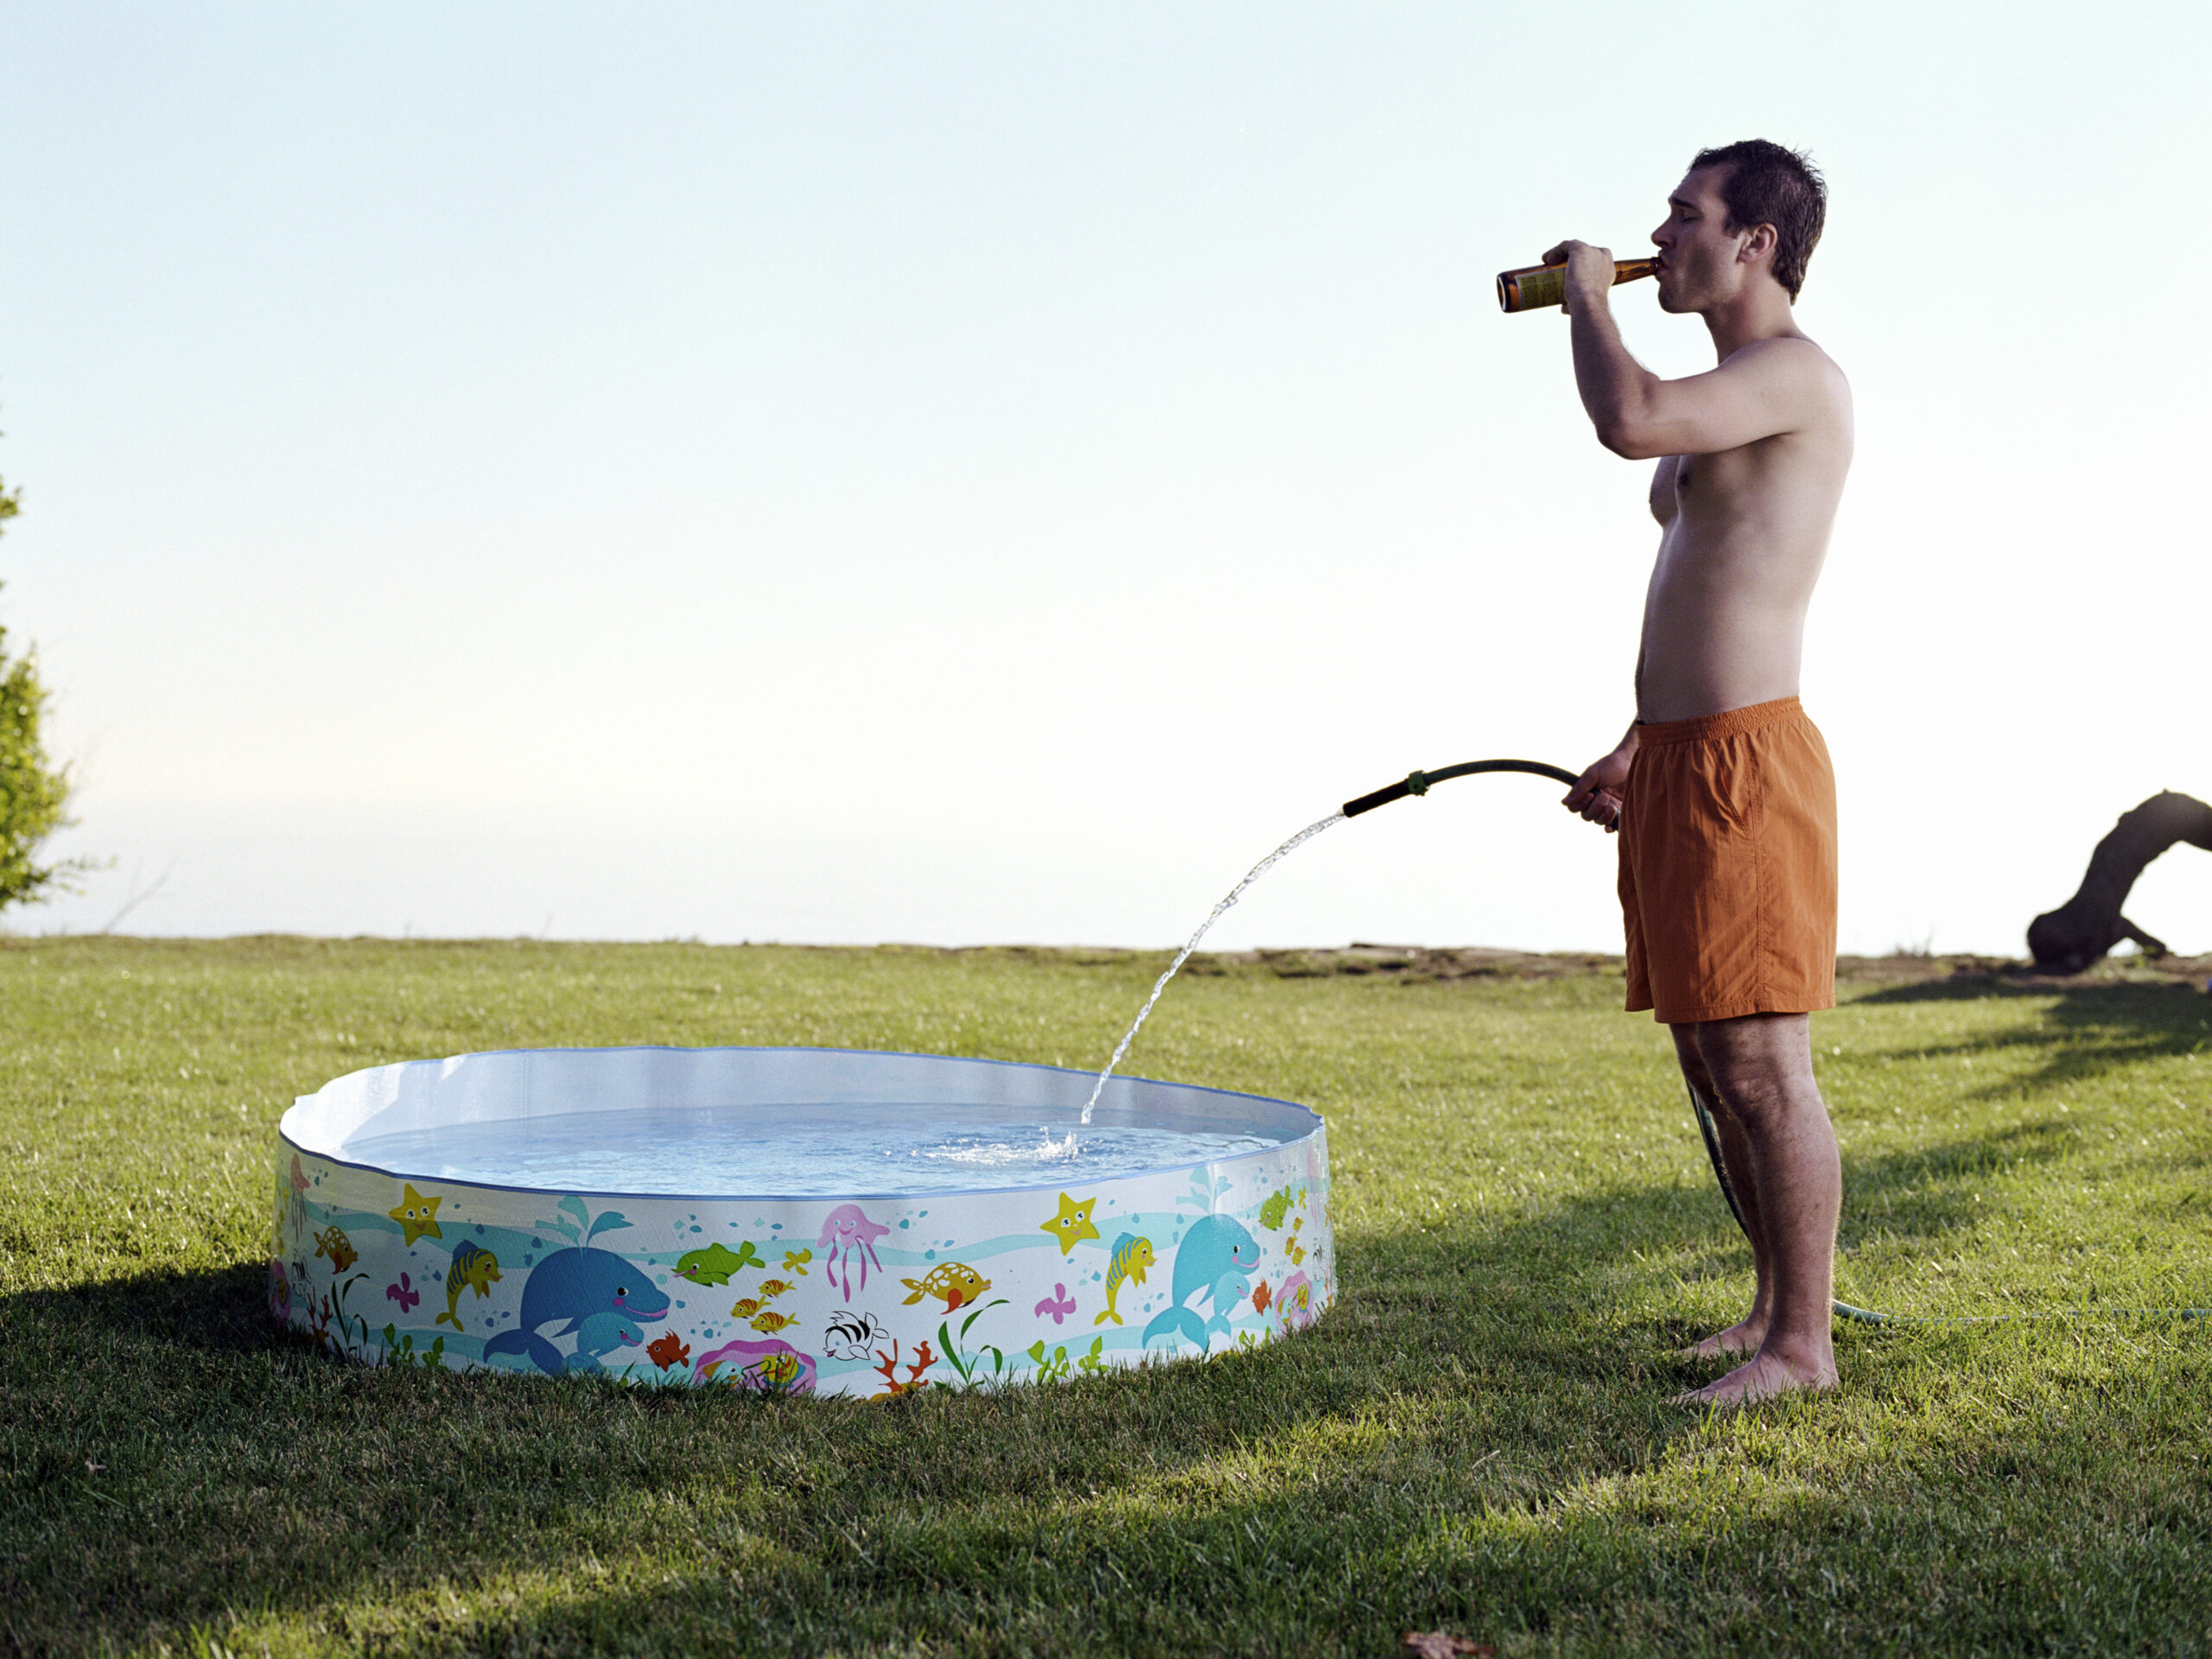 Young man filling plastic pool with water from hose